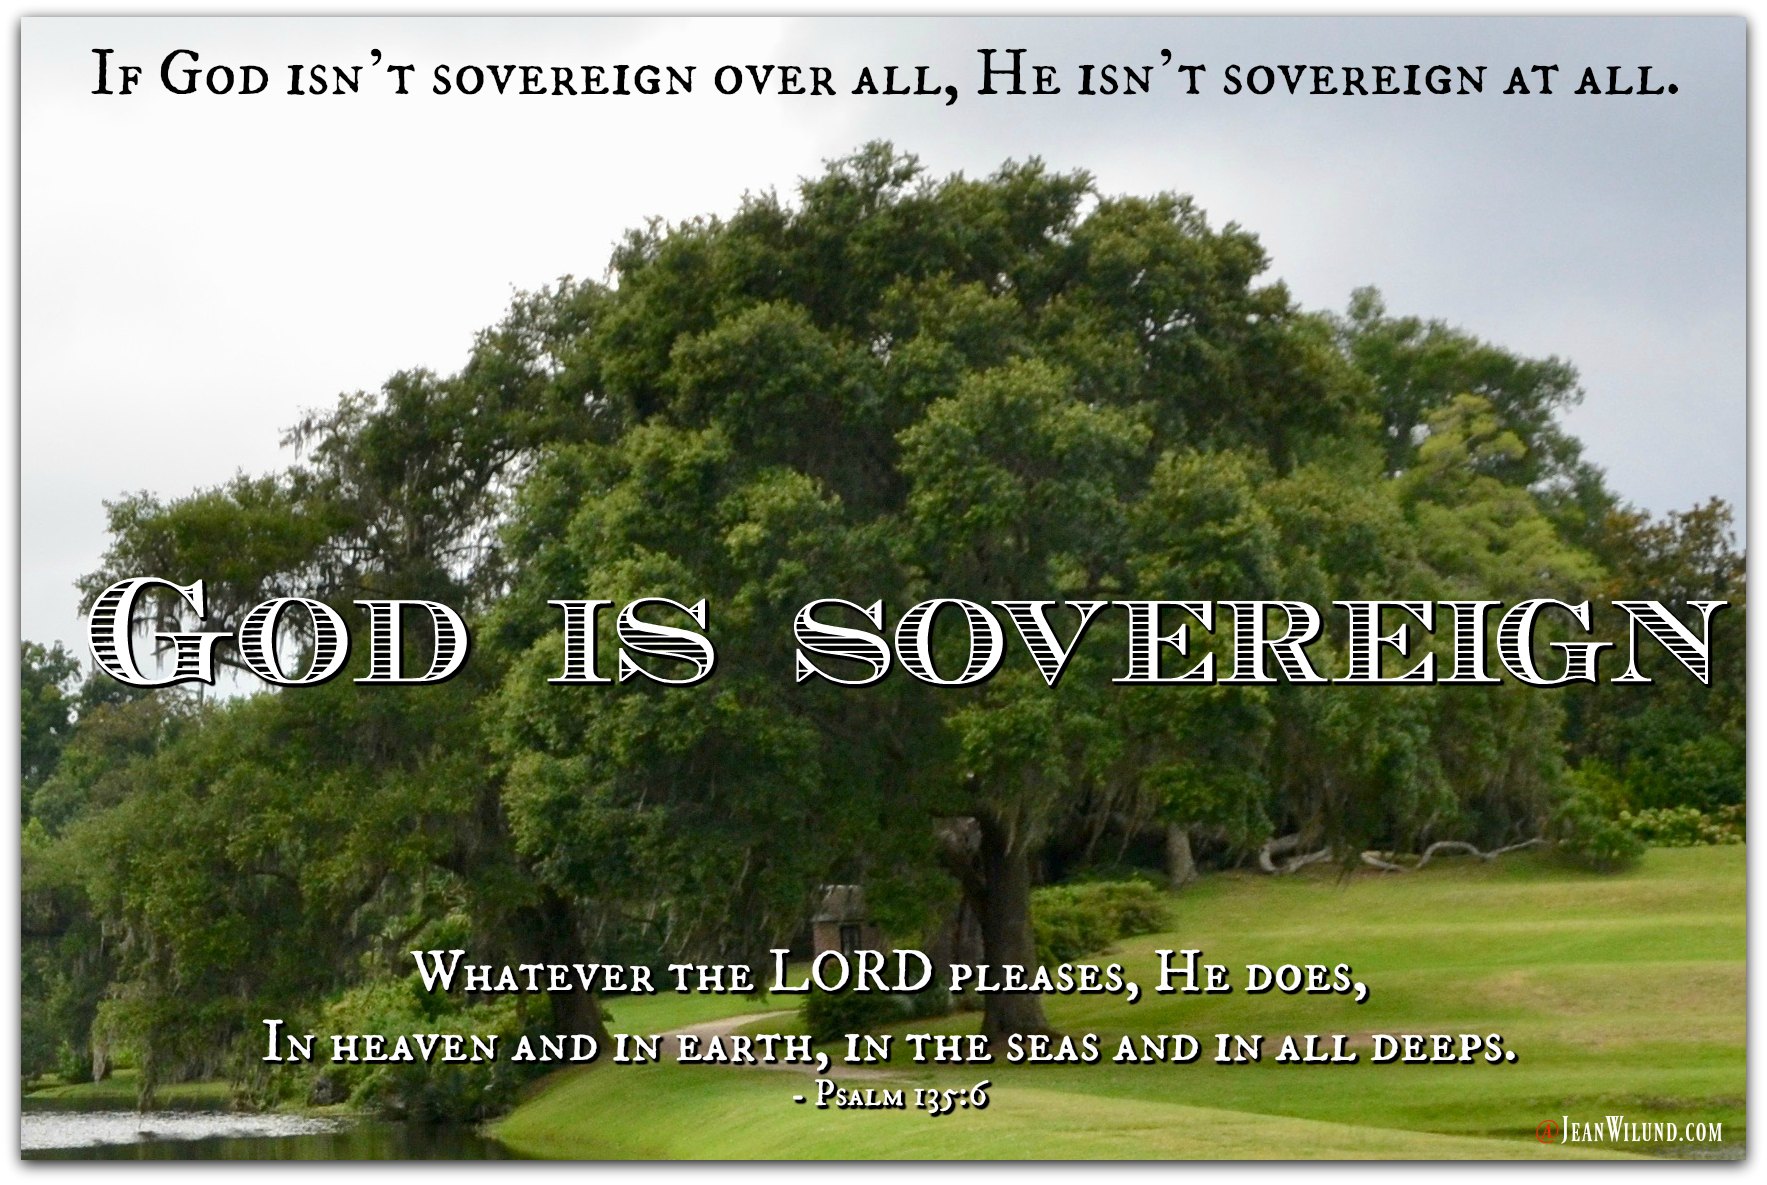 Why is the Truth that God is Sovereign so Comforting?